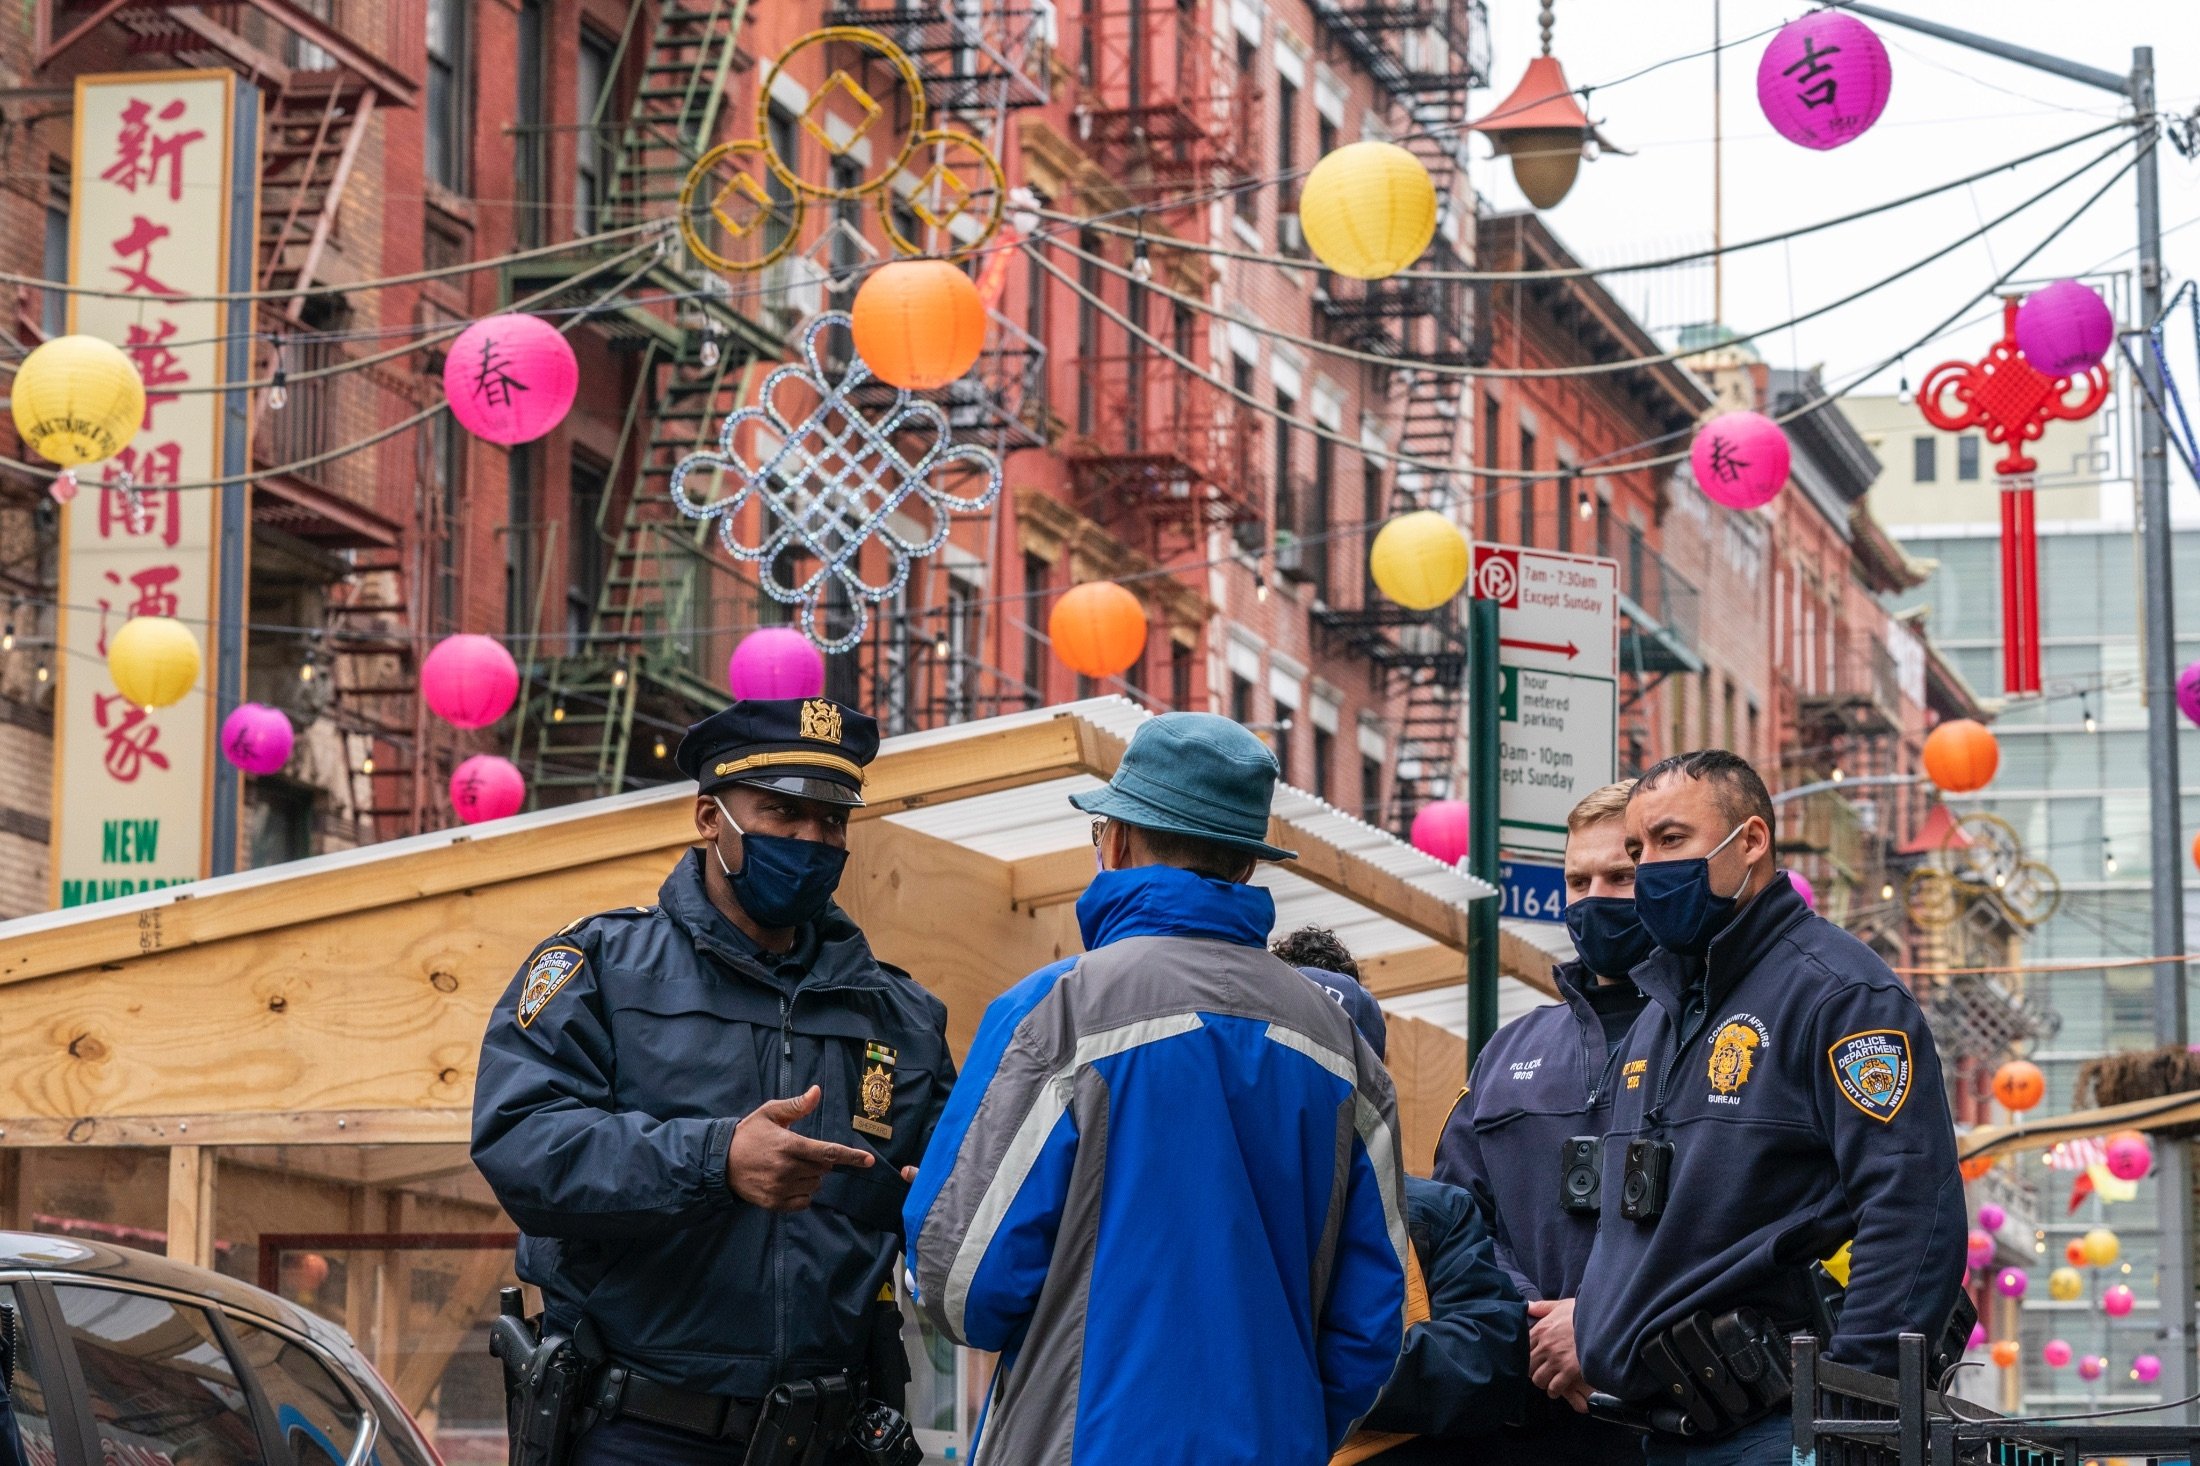 Capt. Tarik Sheppard (L), Commander of the New York Police Department Community Affairs Rapid Response Unit speaks to a resident while on a community outreach patrol in the Chinatown neighborhood of New York, U.S., March 17, 2021. (AP Photo)